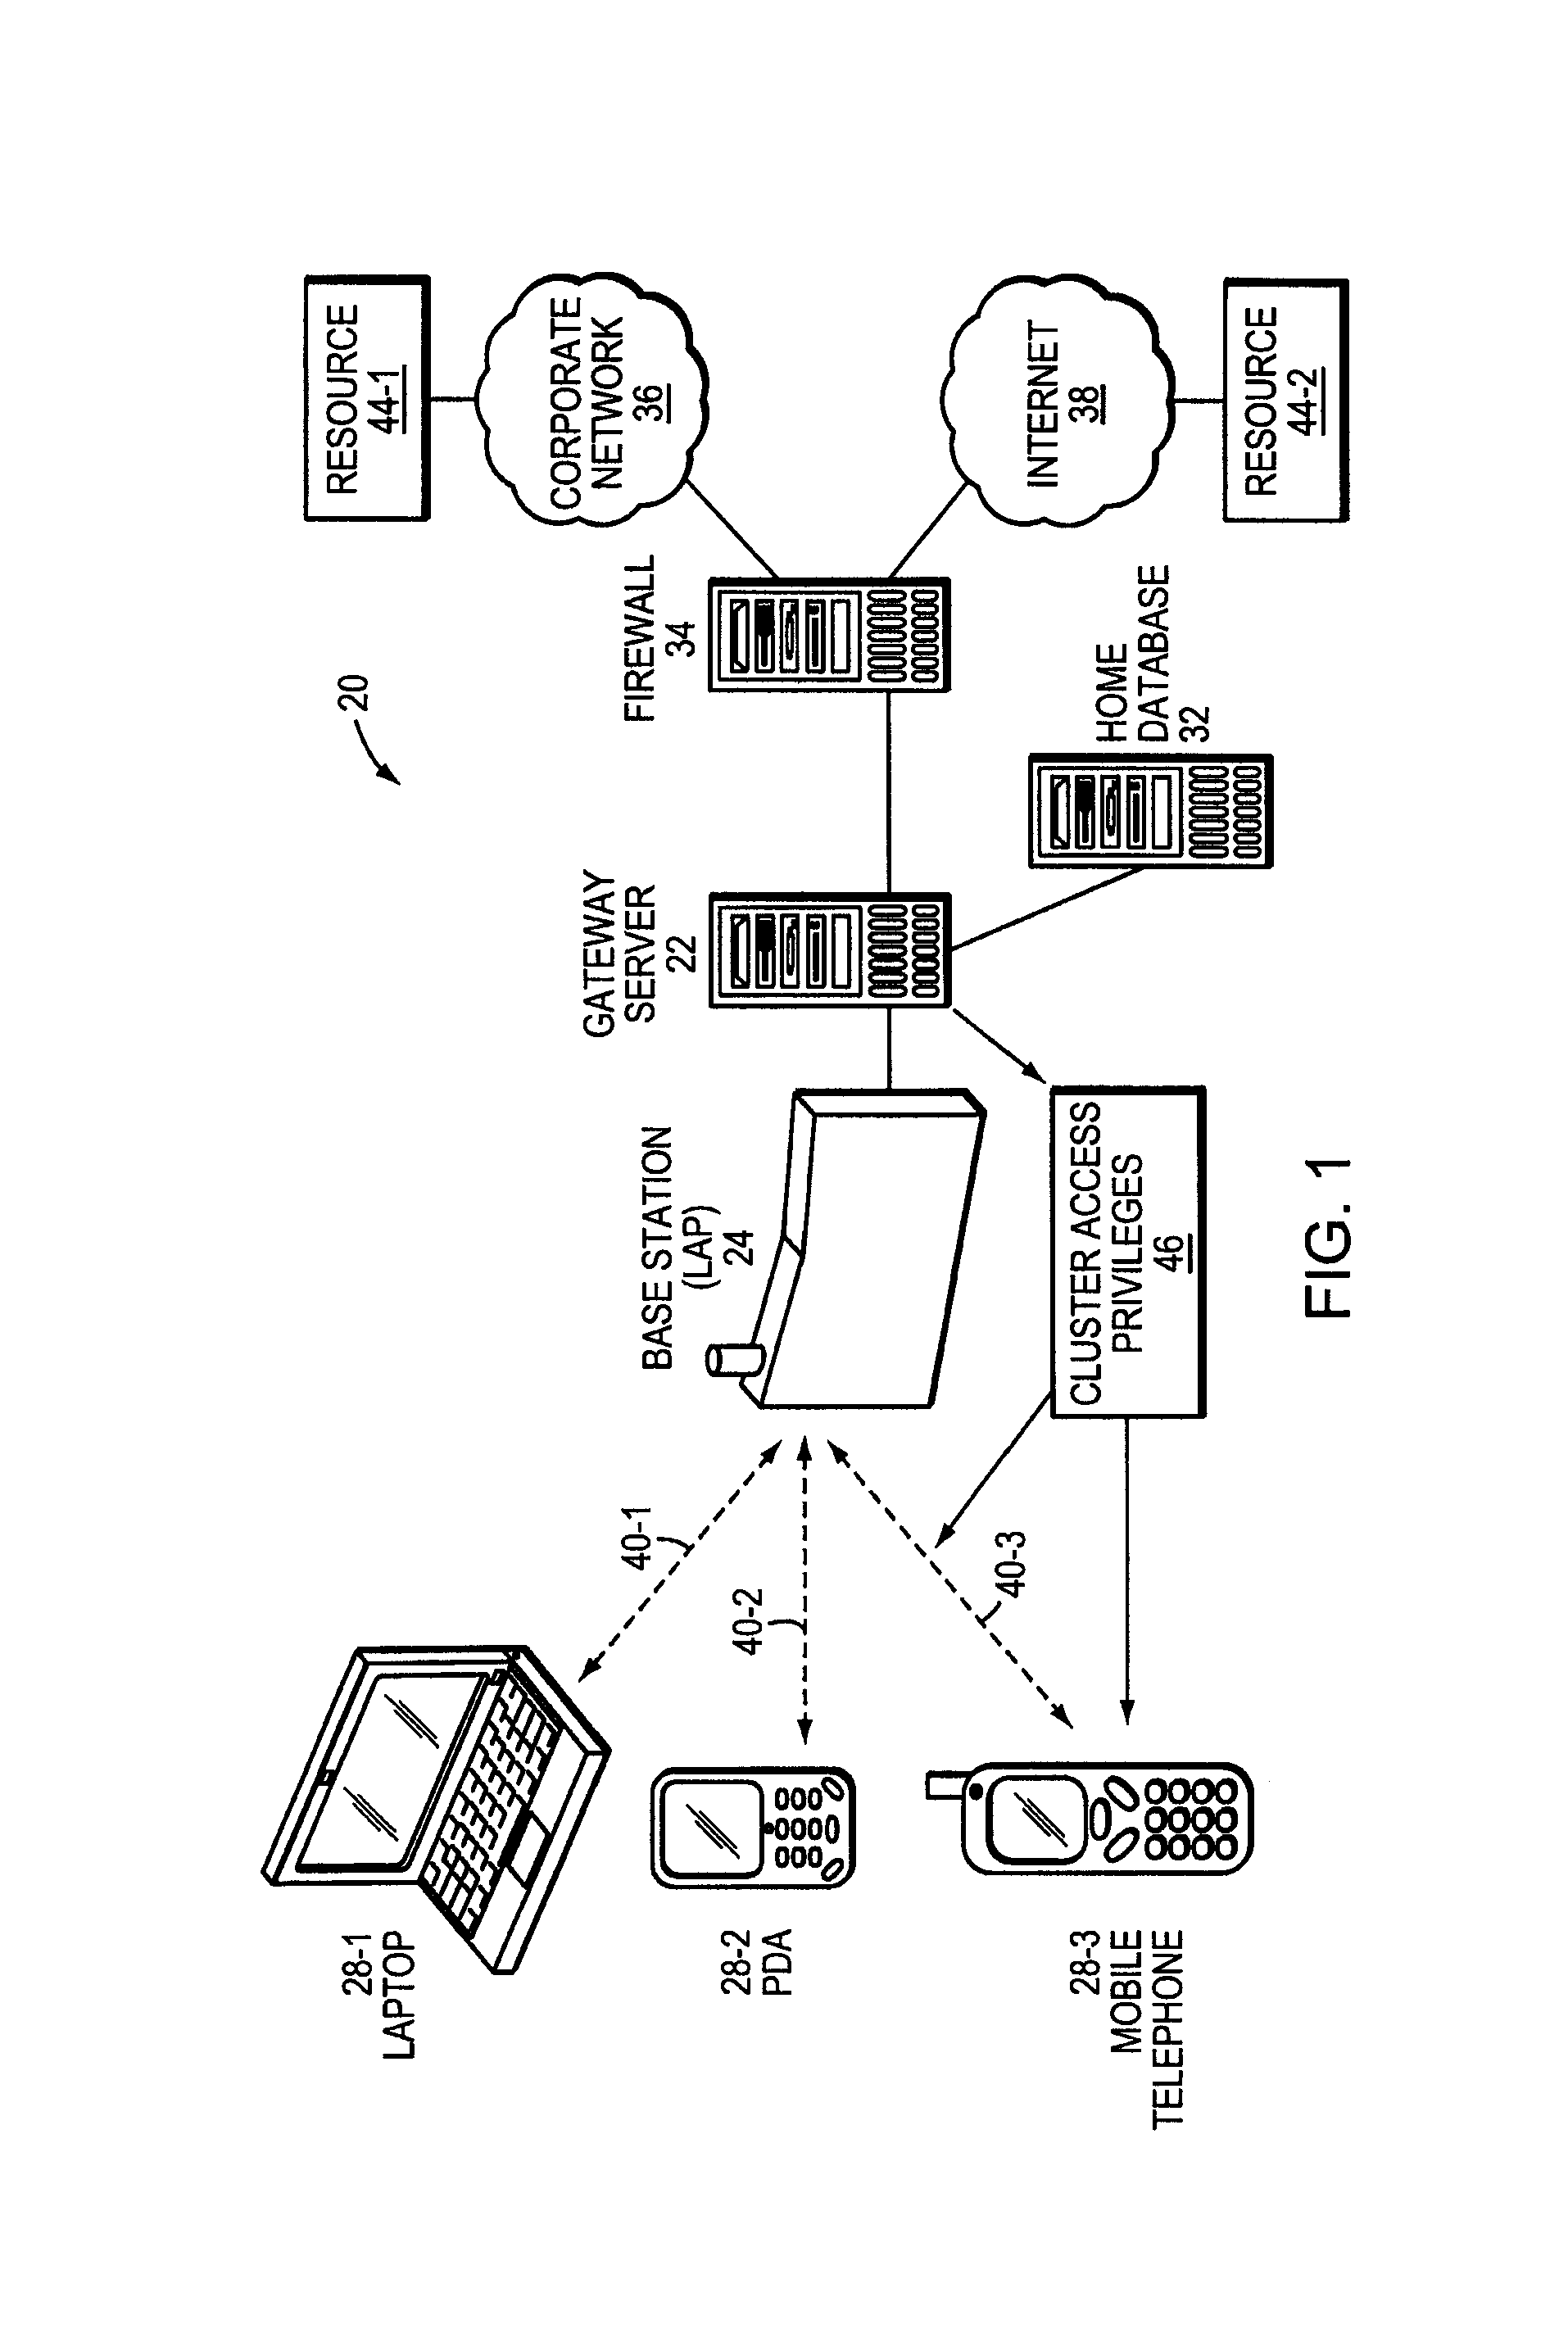 Method and system for enabling seamless roaming in a wireless network